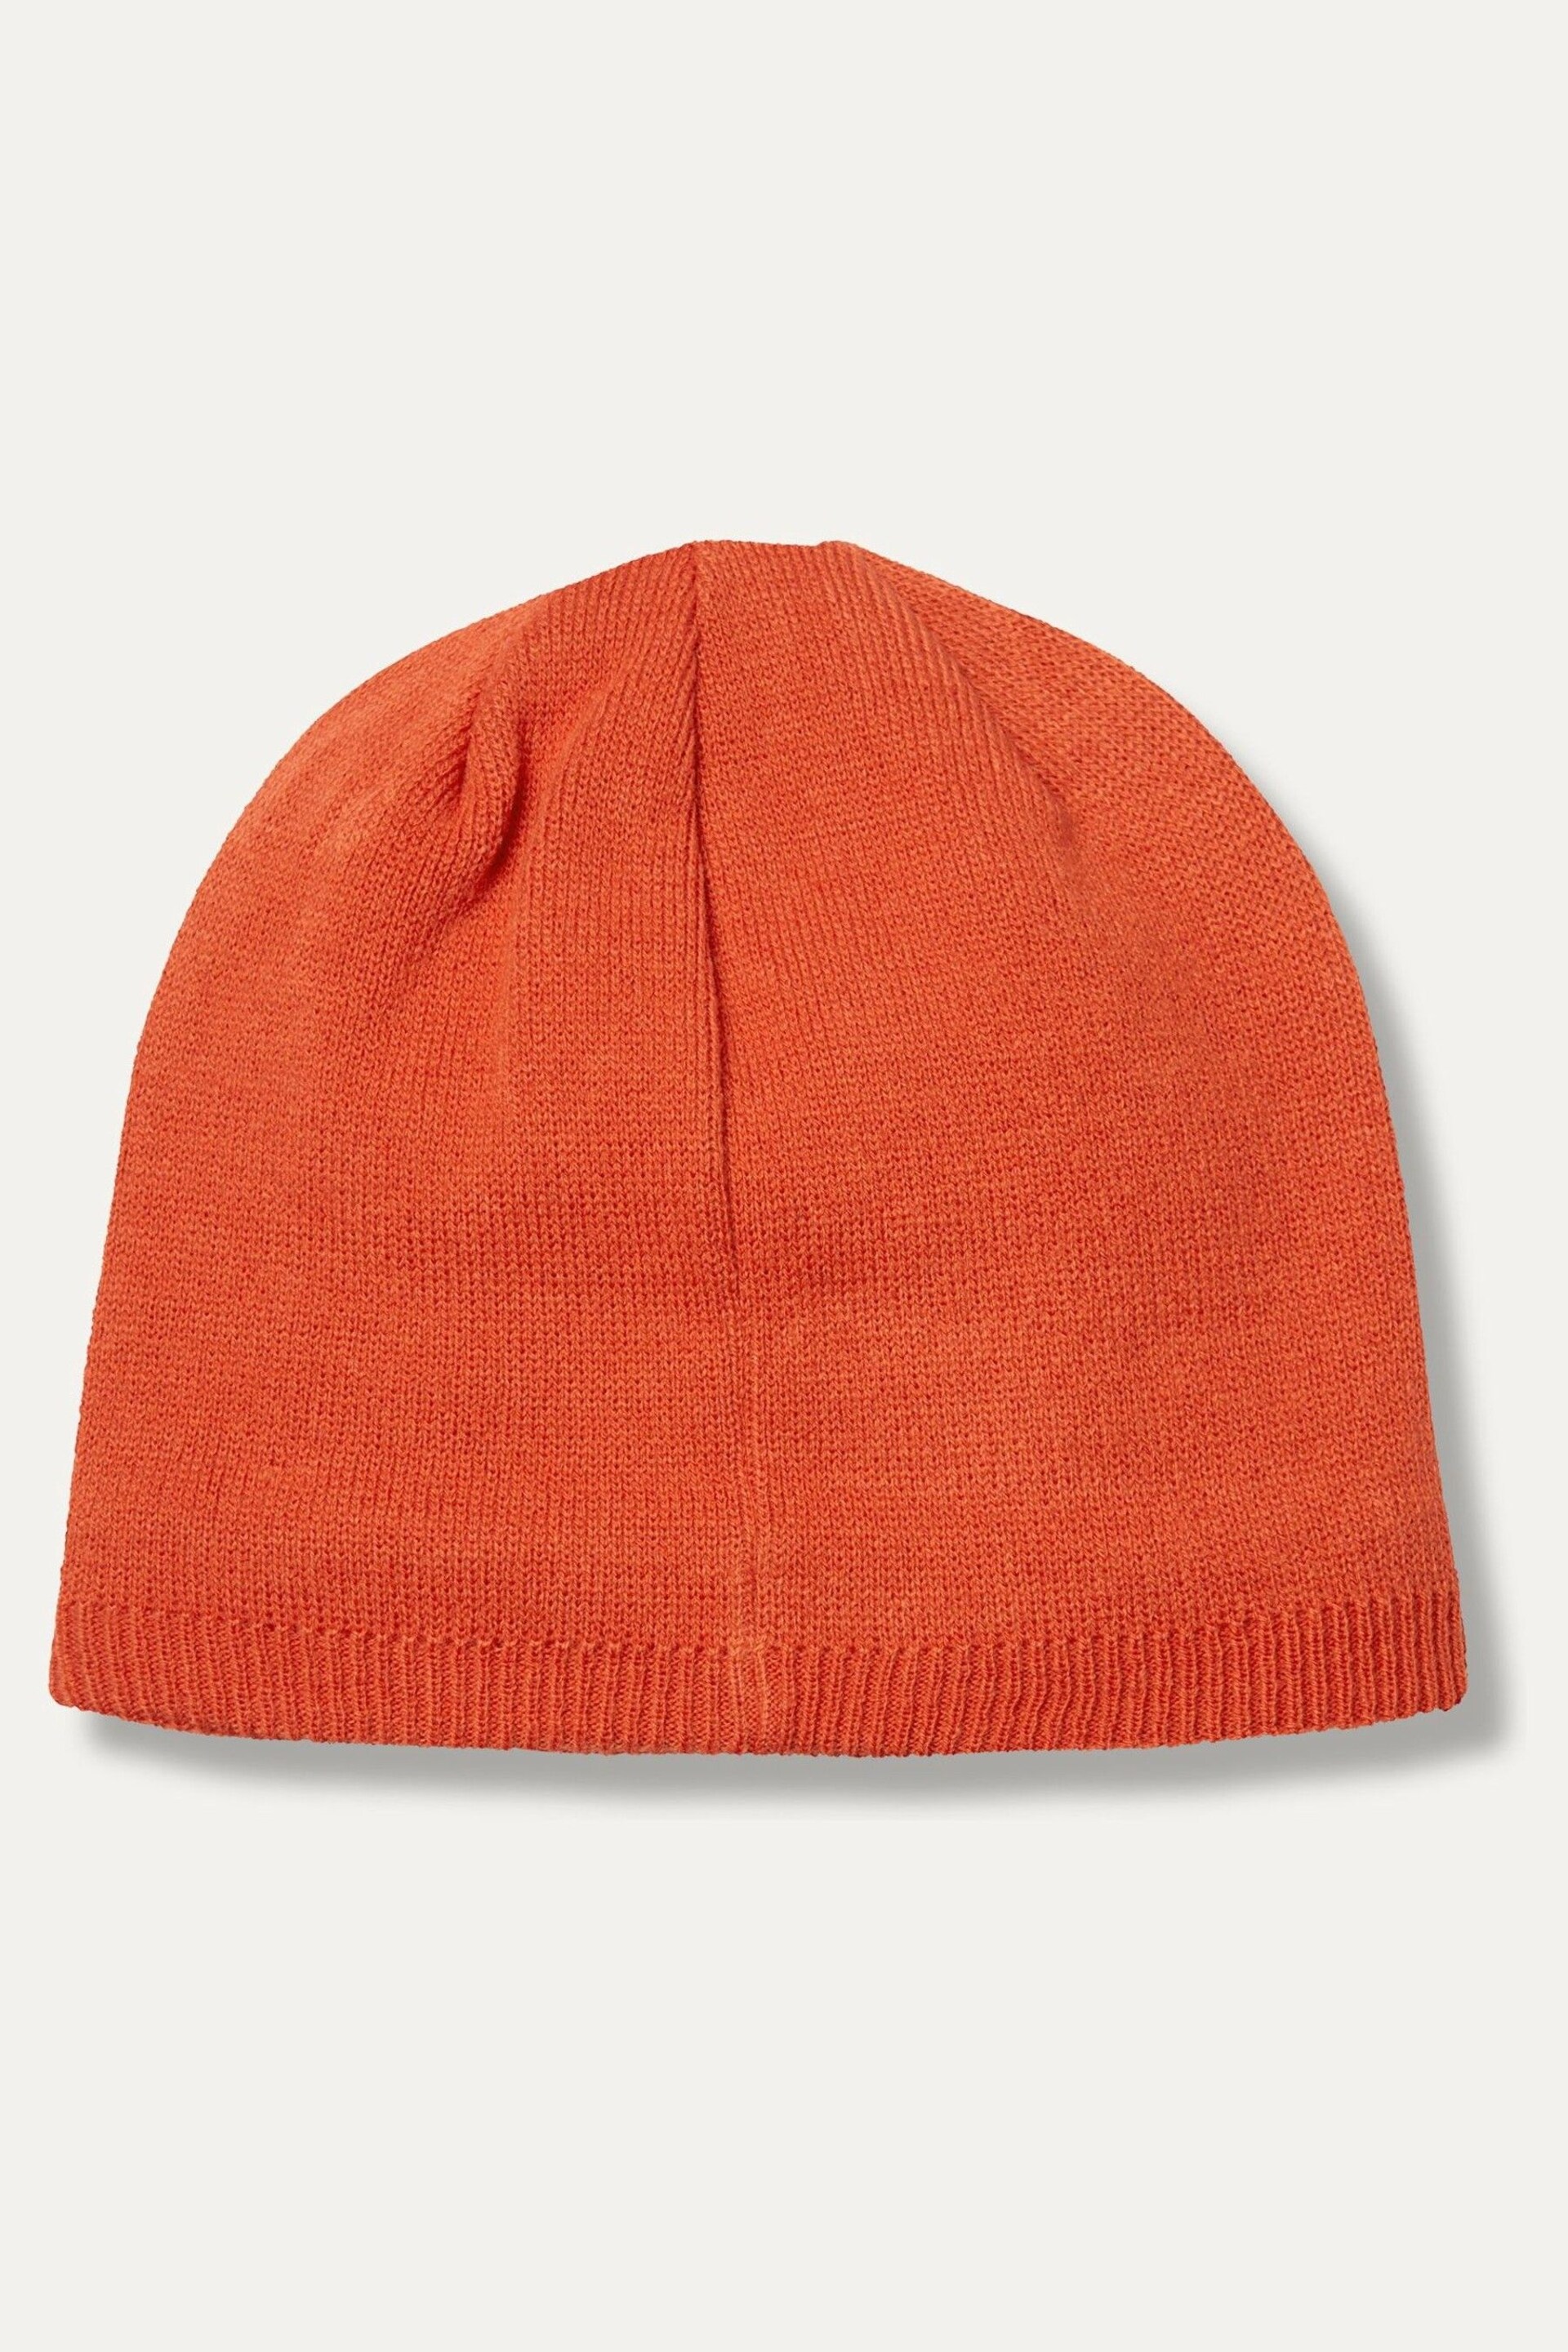 Sealskinz Cley Waterproof Cold Weather Beanie - Image 2 of 2